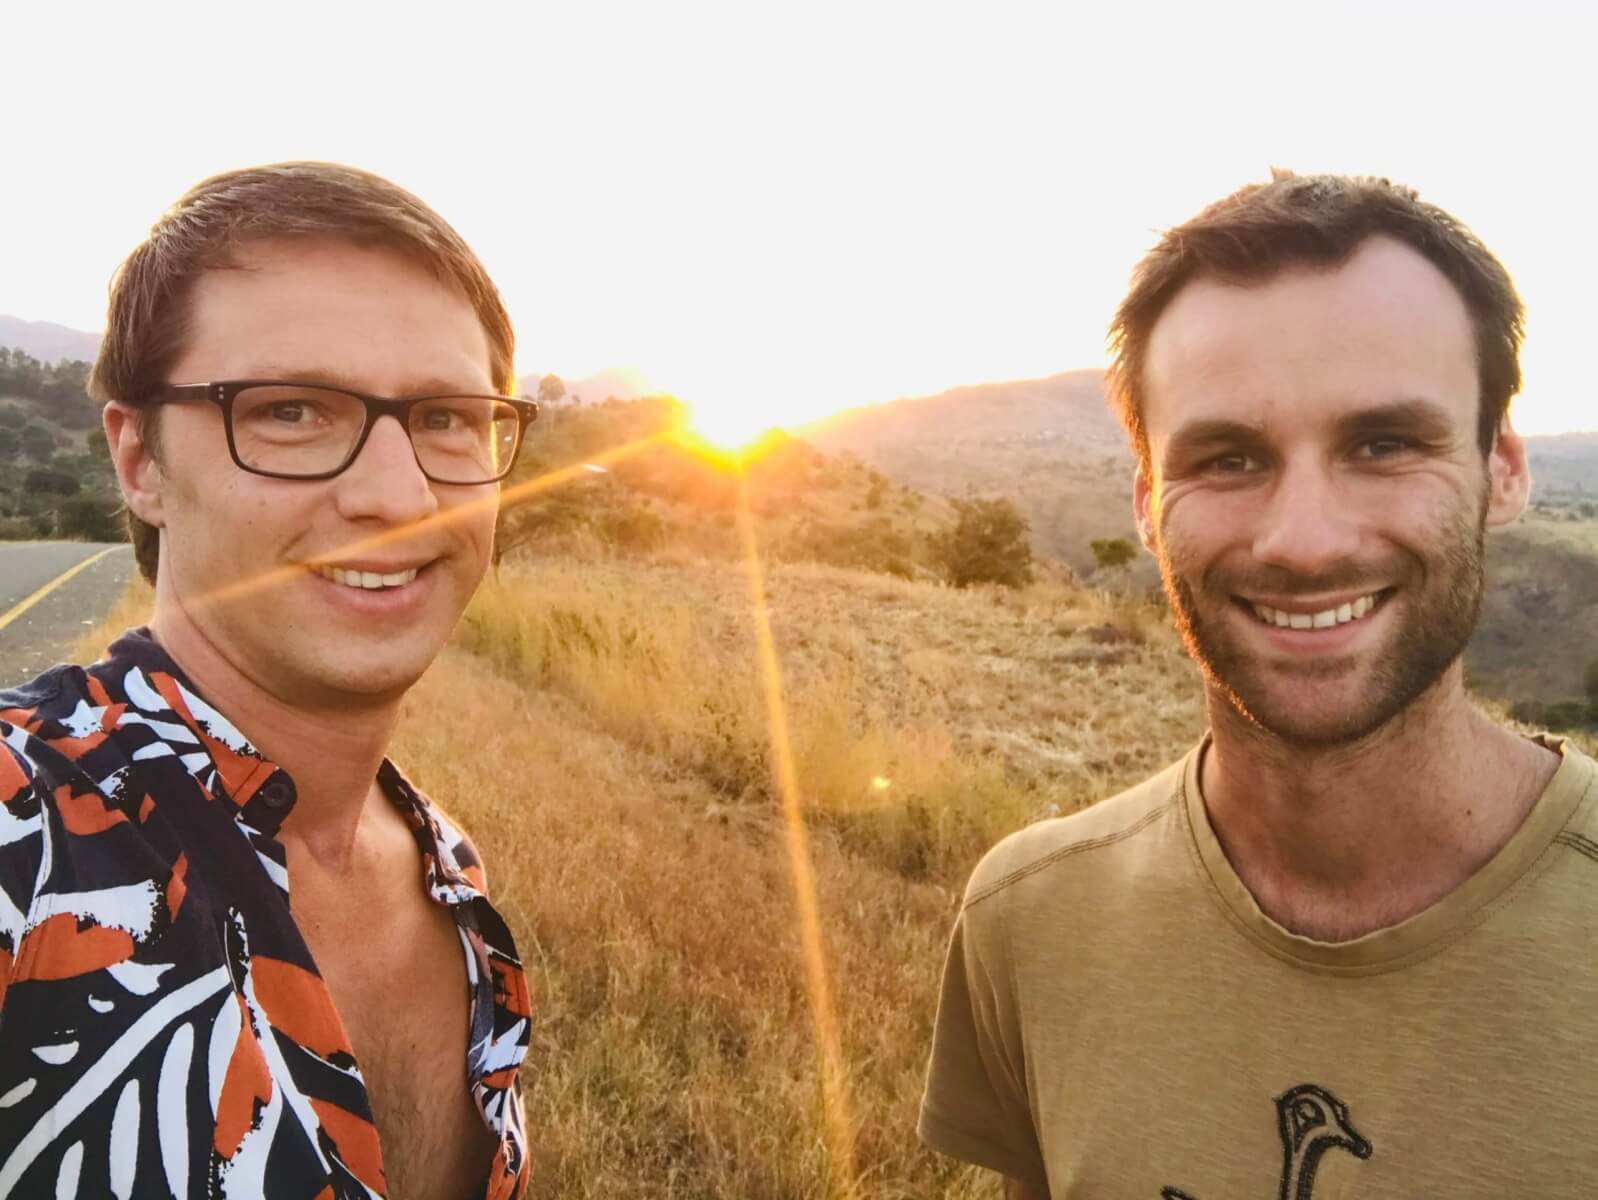 Dilo and Hessel from 1 2 Travel Africa at sunset in Malawi